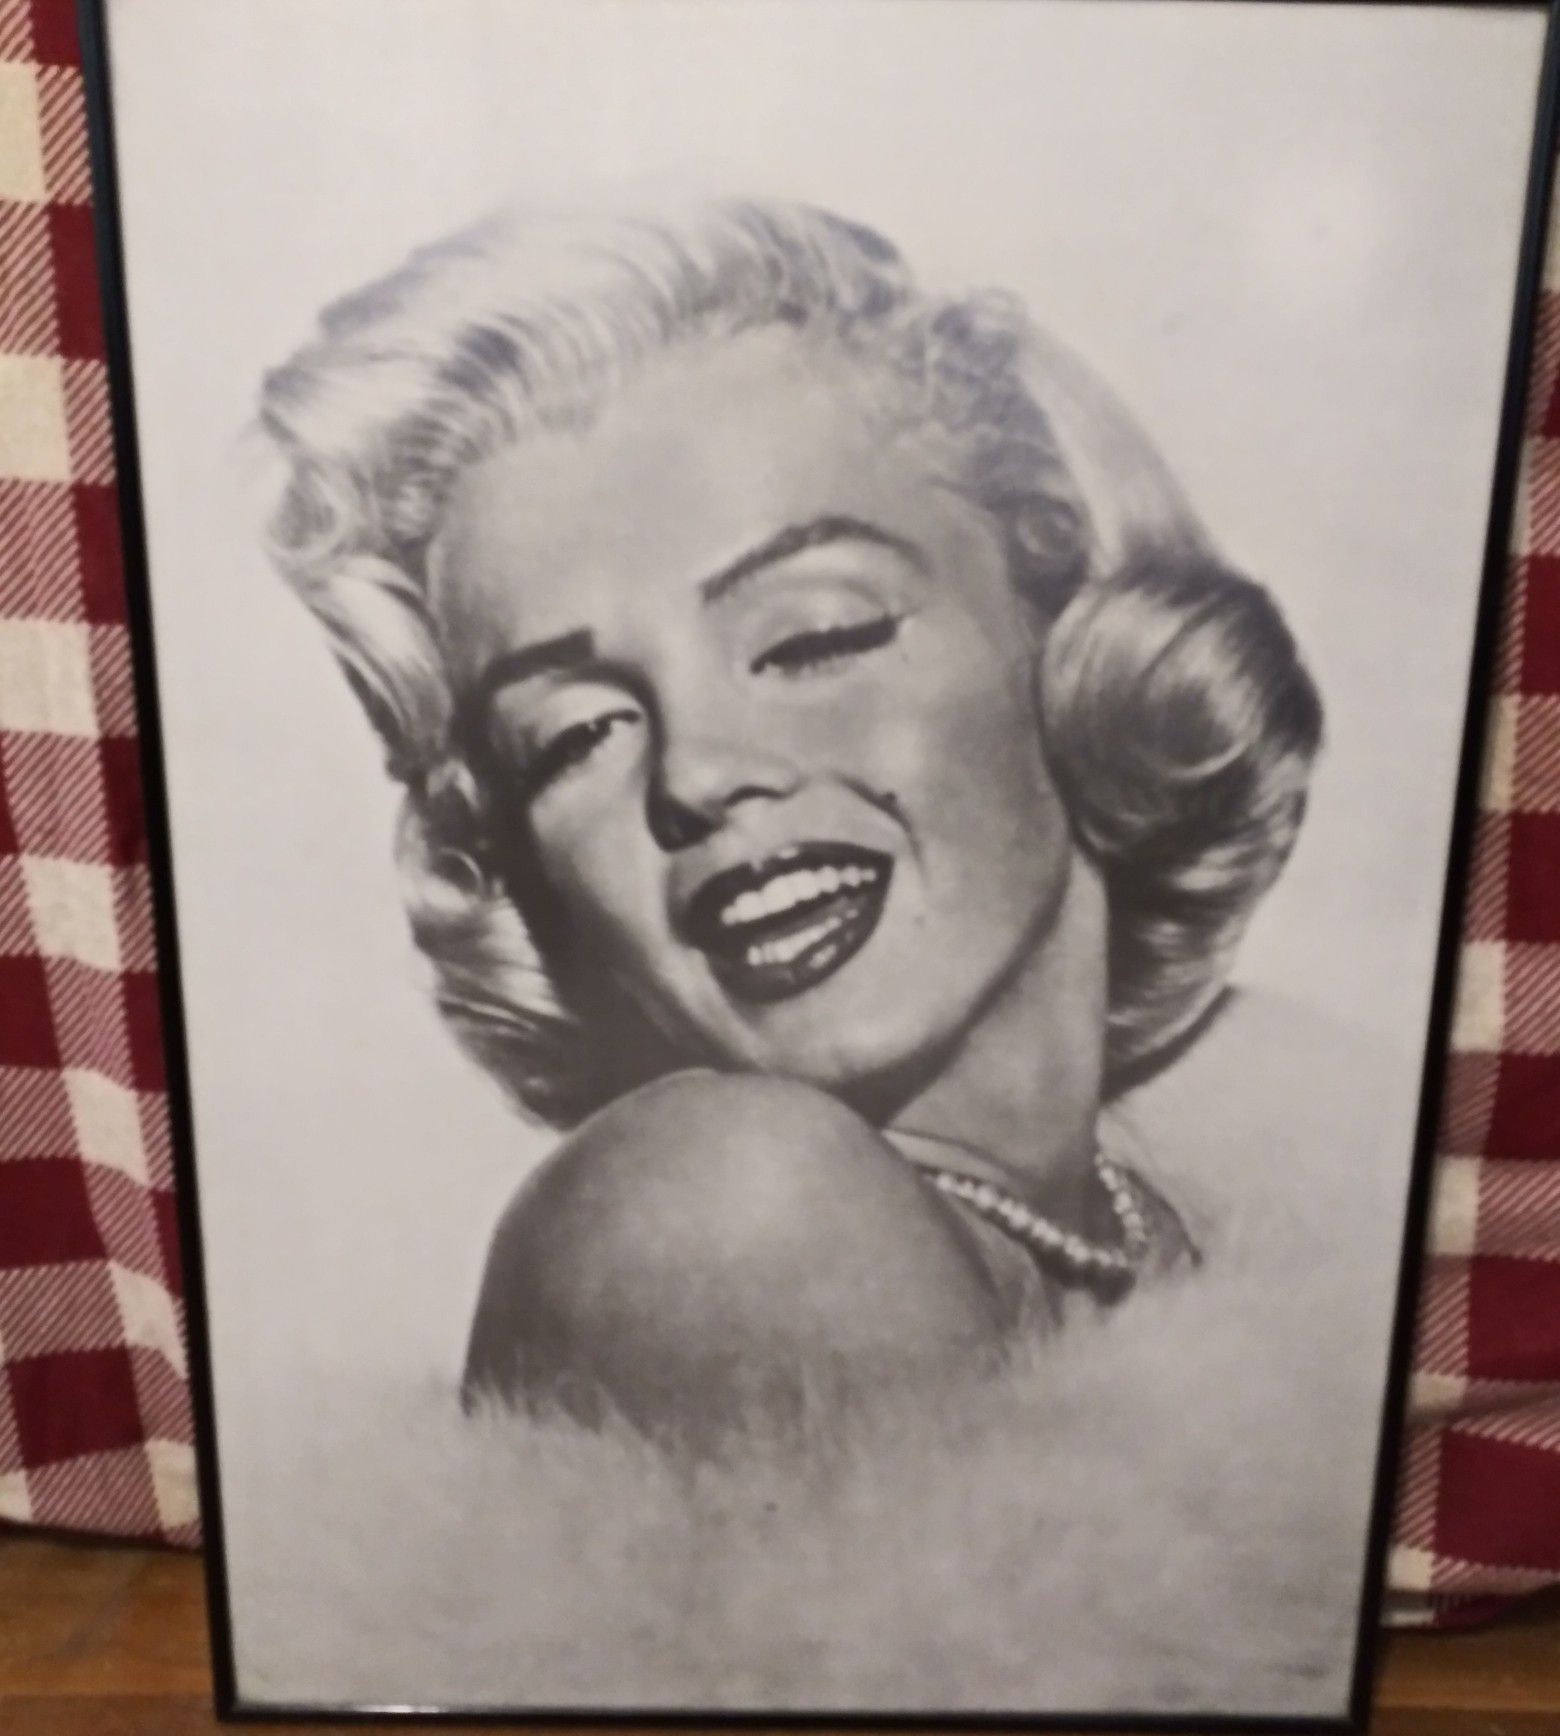 Marilyn Monroe picture